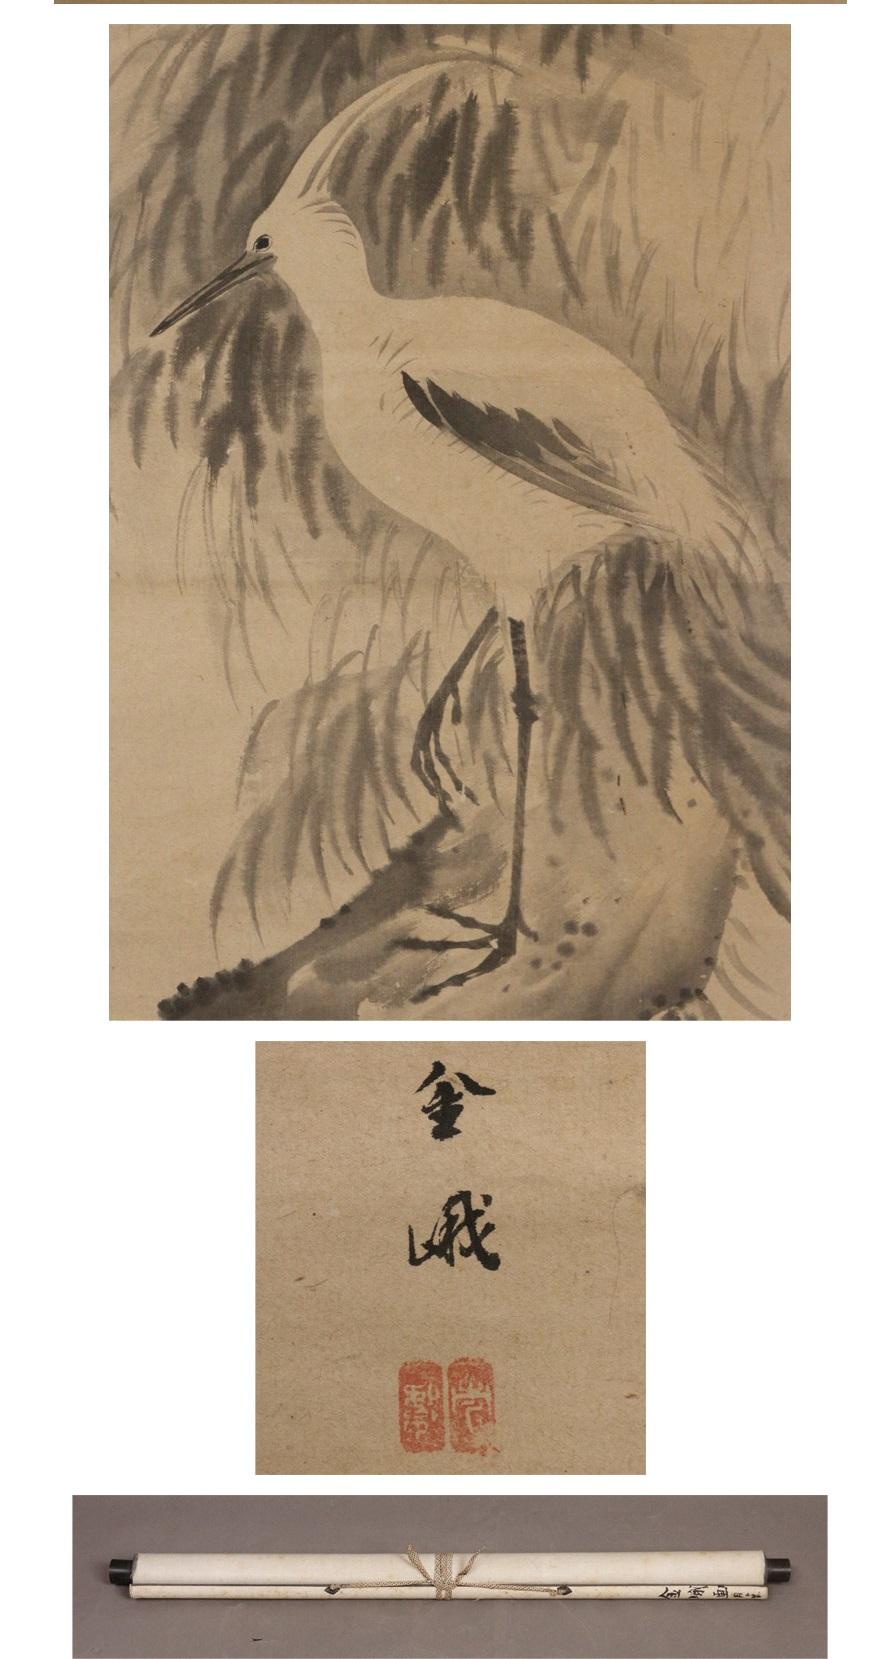 It is a work drawn by Furuichi Kintomi as you can see.
In addition to the fantastic depth of willow under the moon, the Egret
that shines in the night view is a truly delicious piece.

«Furuichi Kintome»
A painter from the late Tokugawa period